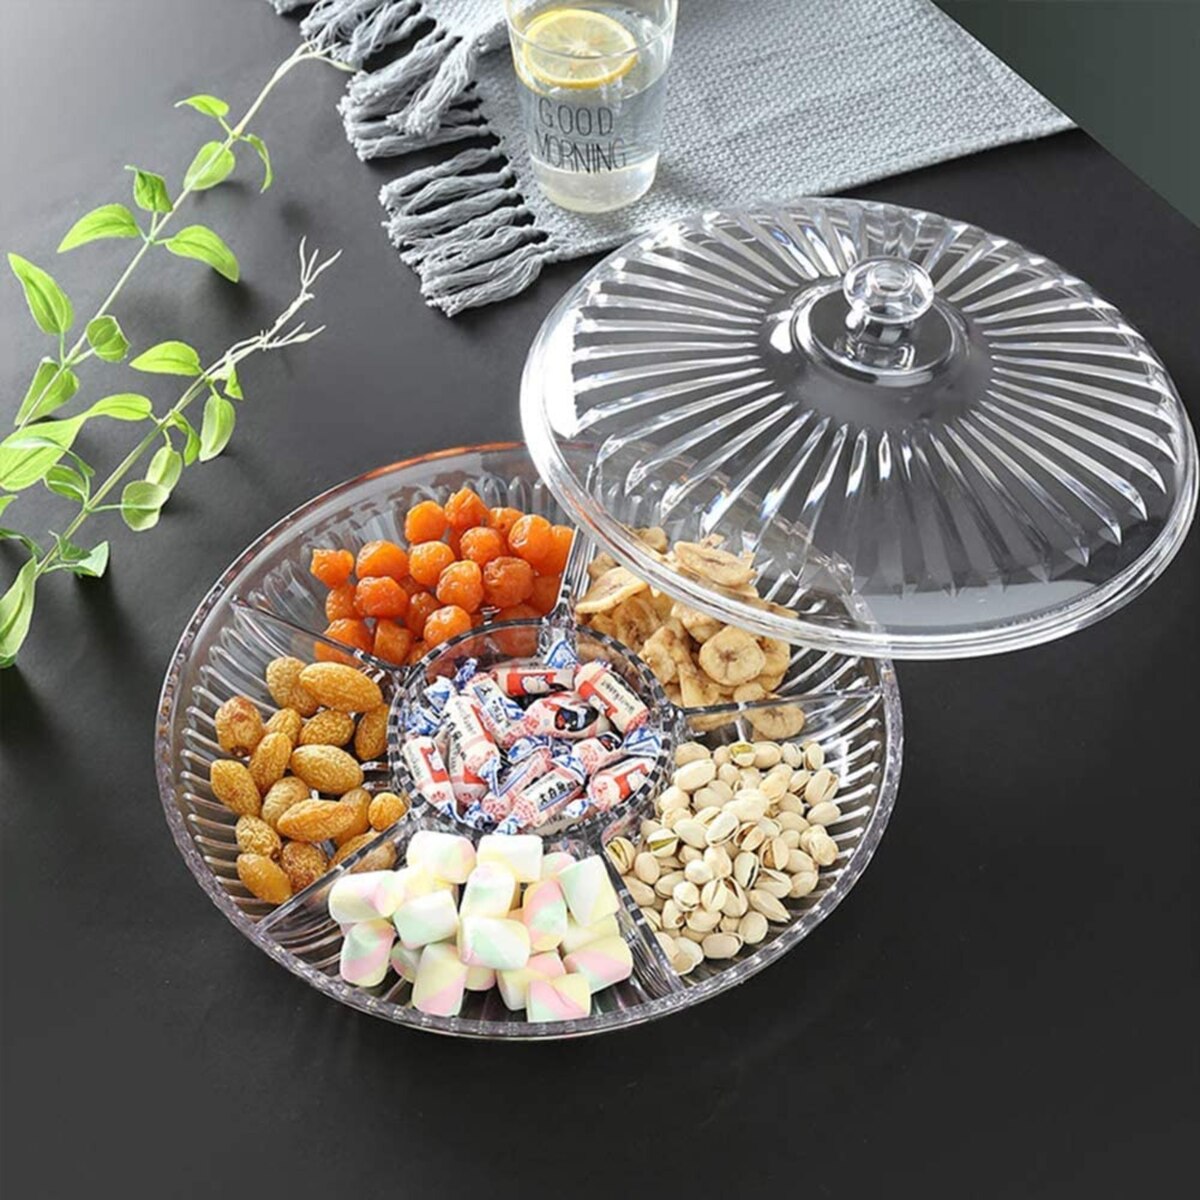 Black Stone Acrylic Nuts / Candy Tray 6 Portion With Lid BA4117